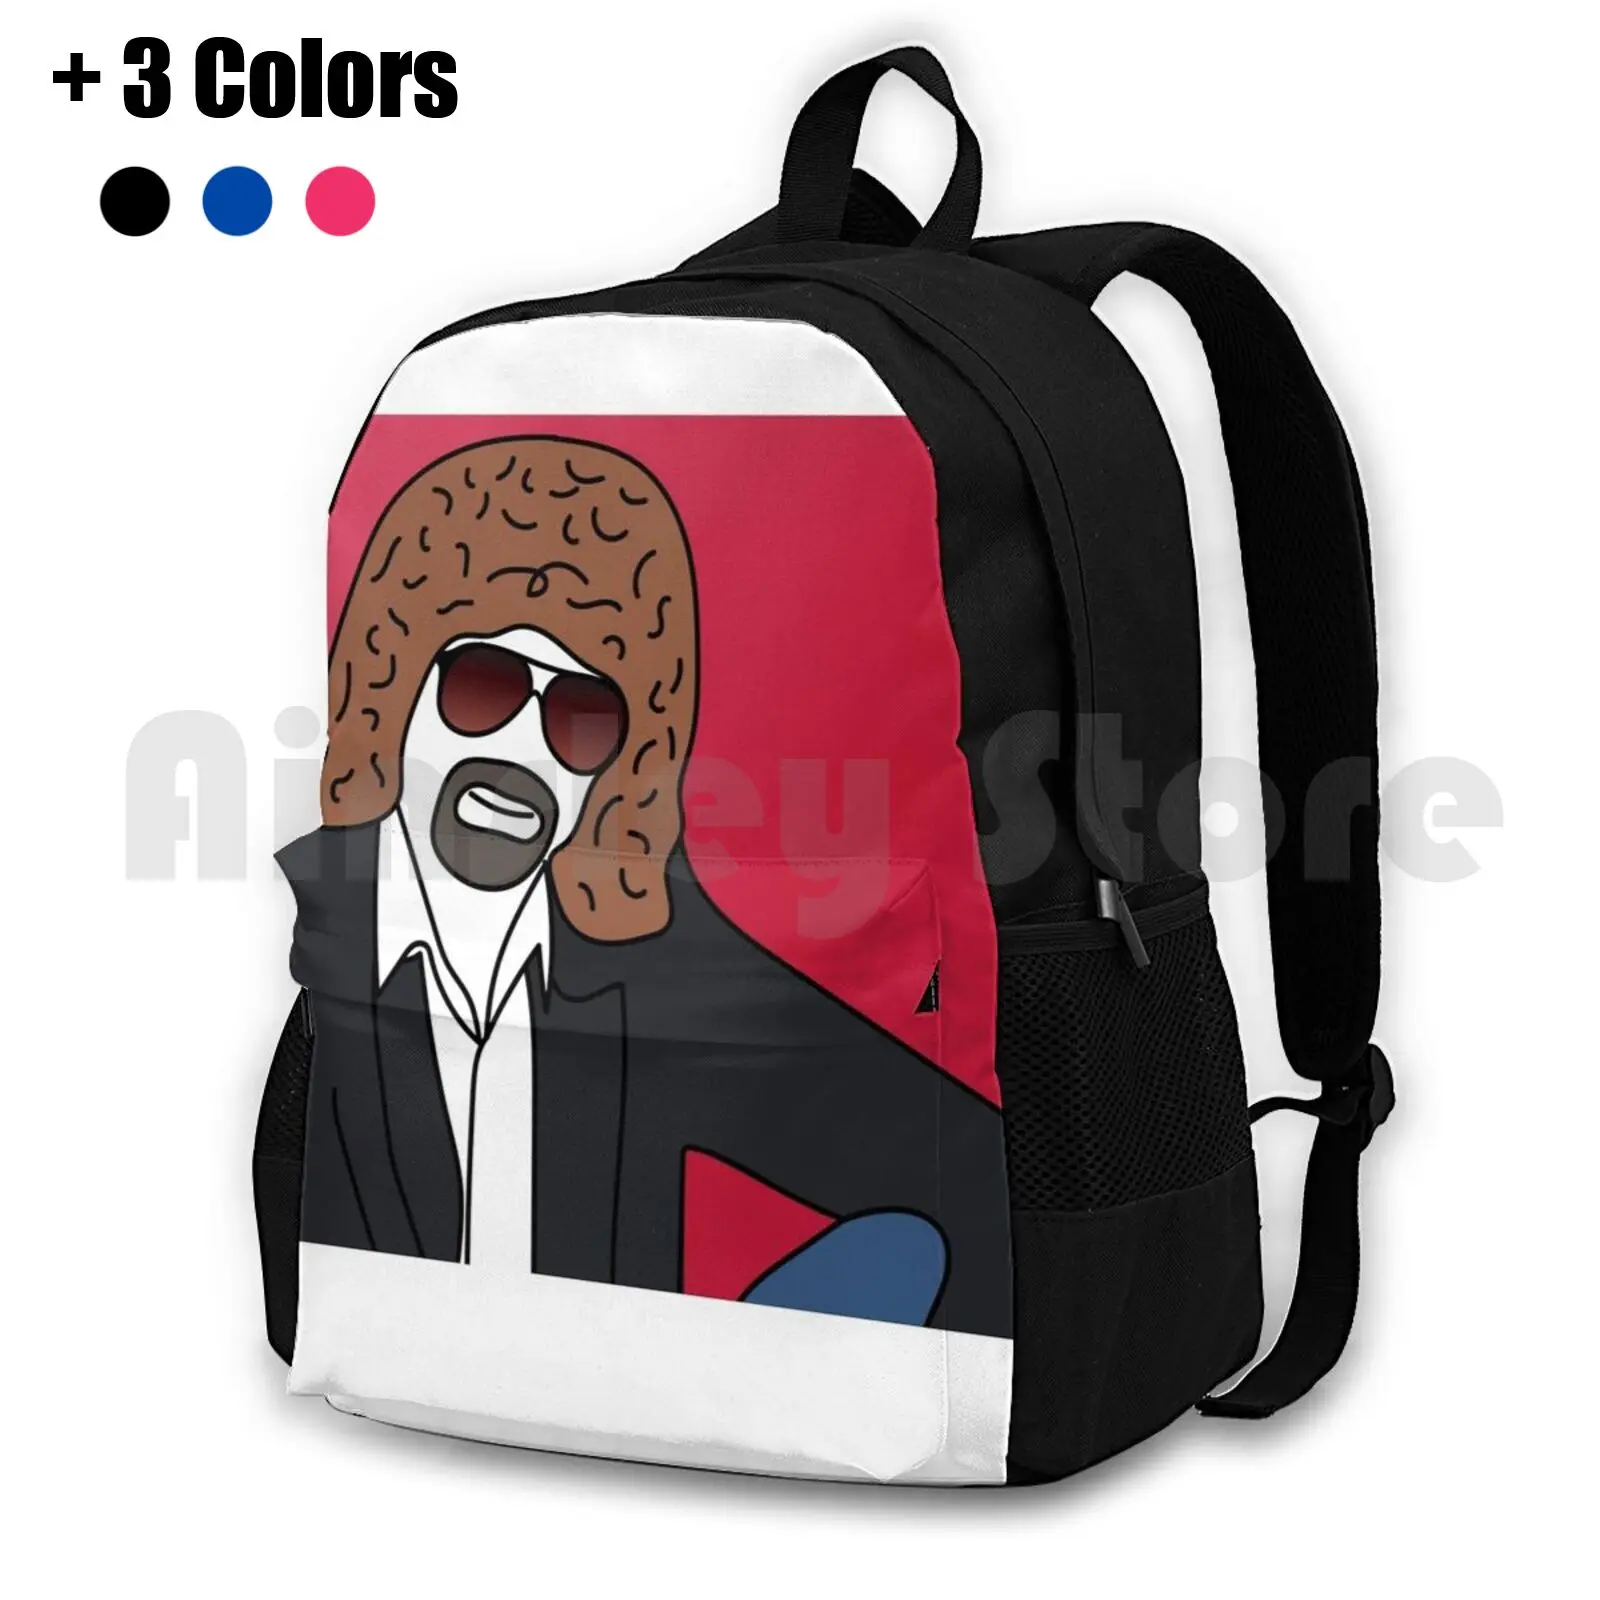 

Elo Outdoor Hiking Backpack Riding Climbing Sports Bag Elo Music Bands Indie Funny Band Art Alternative Indie Art Music Indie